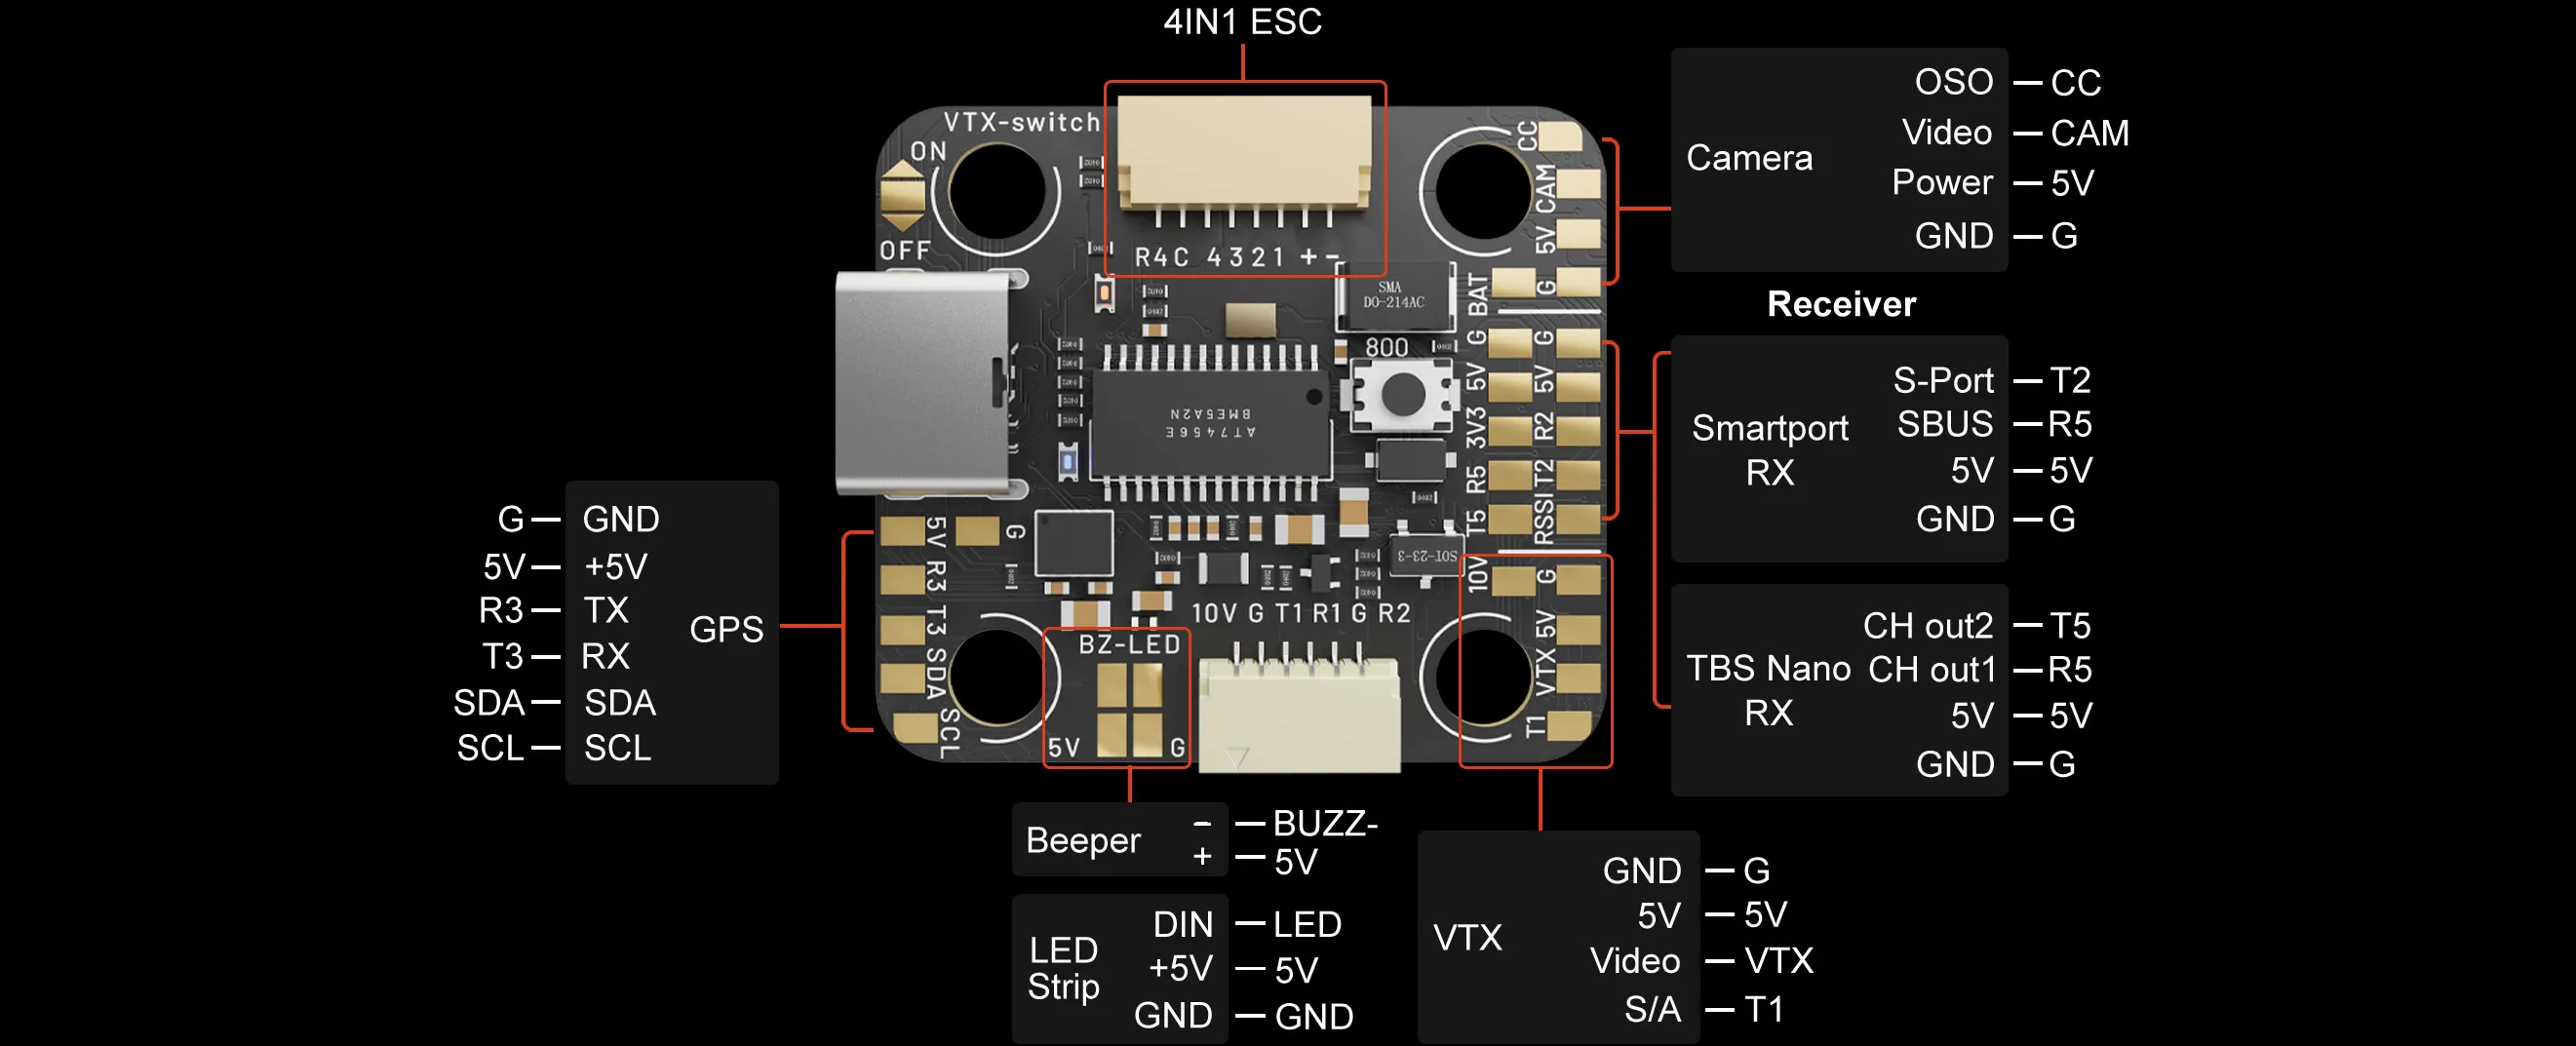 MEPS MINI F7 HD ANALOG flight controller connection diagram